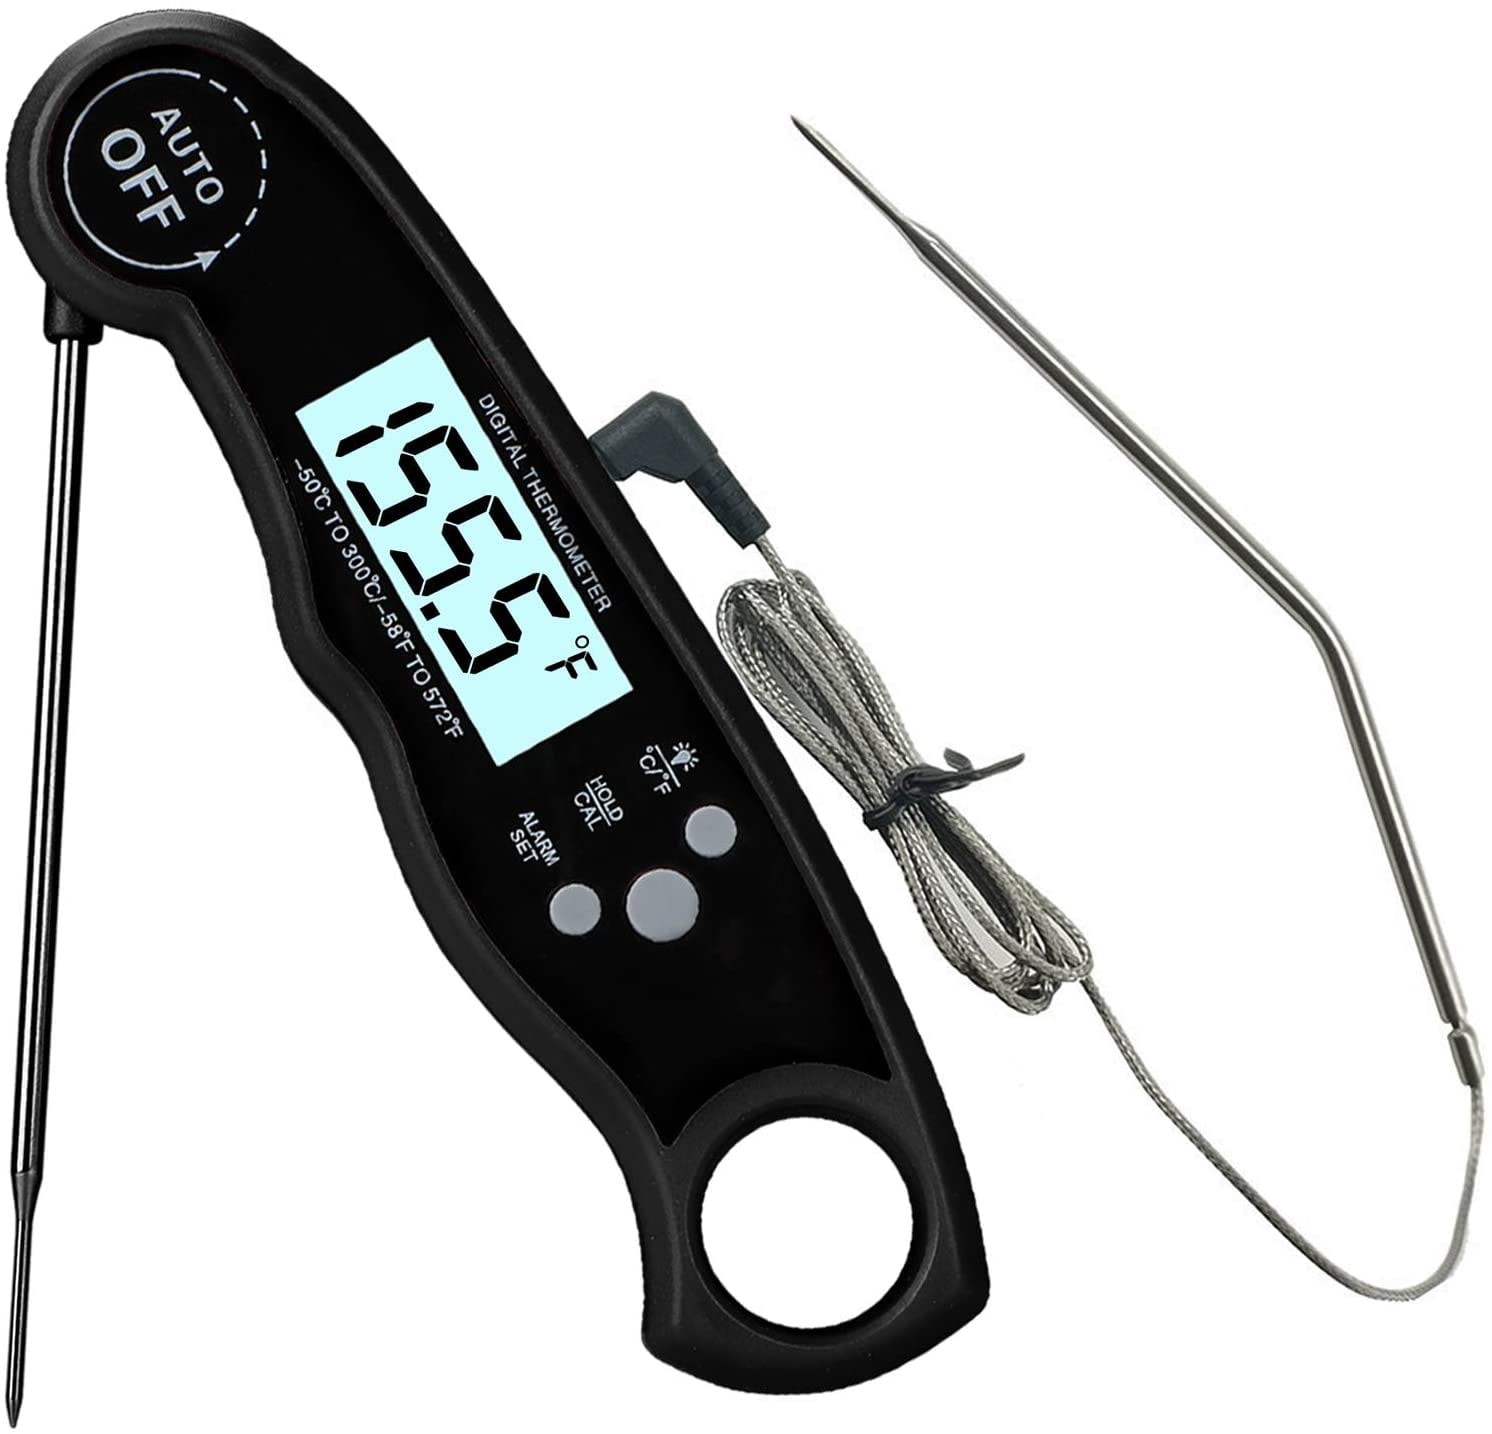 Oven Safe Leave-In Meat Thermometer – hold end dist